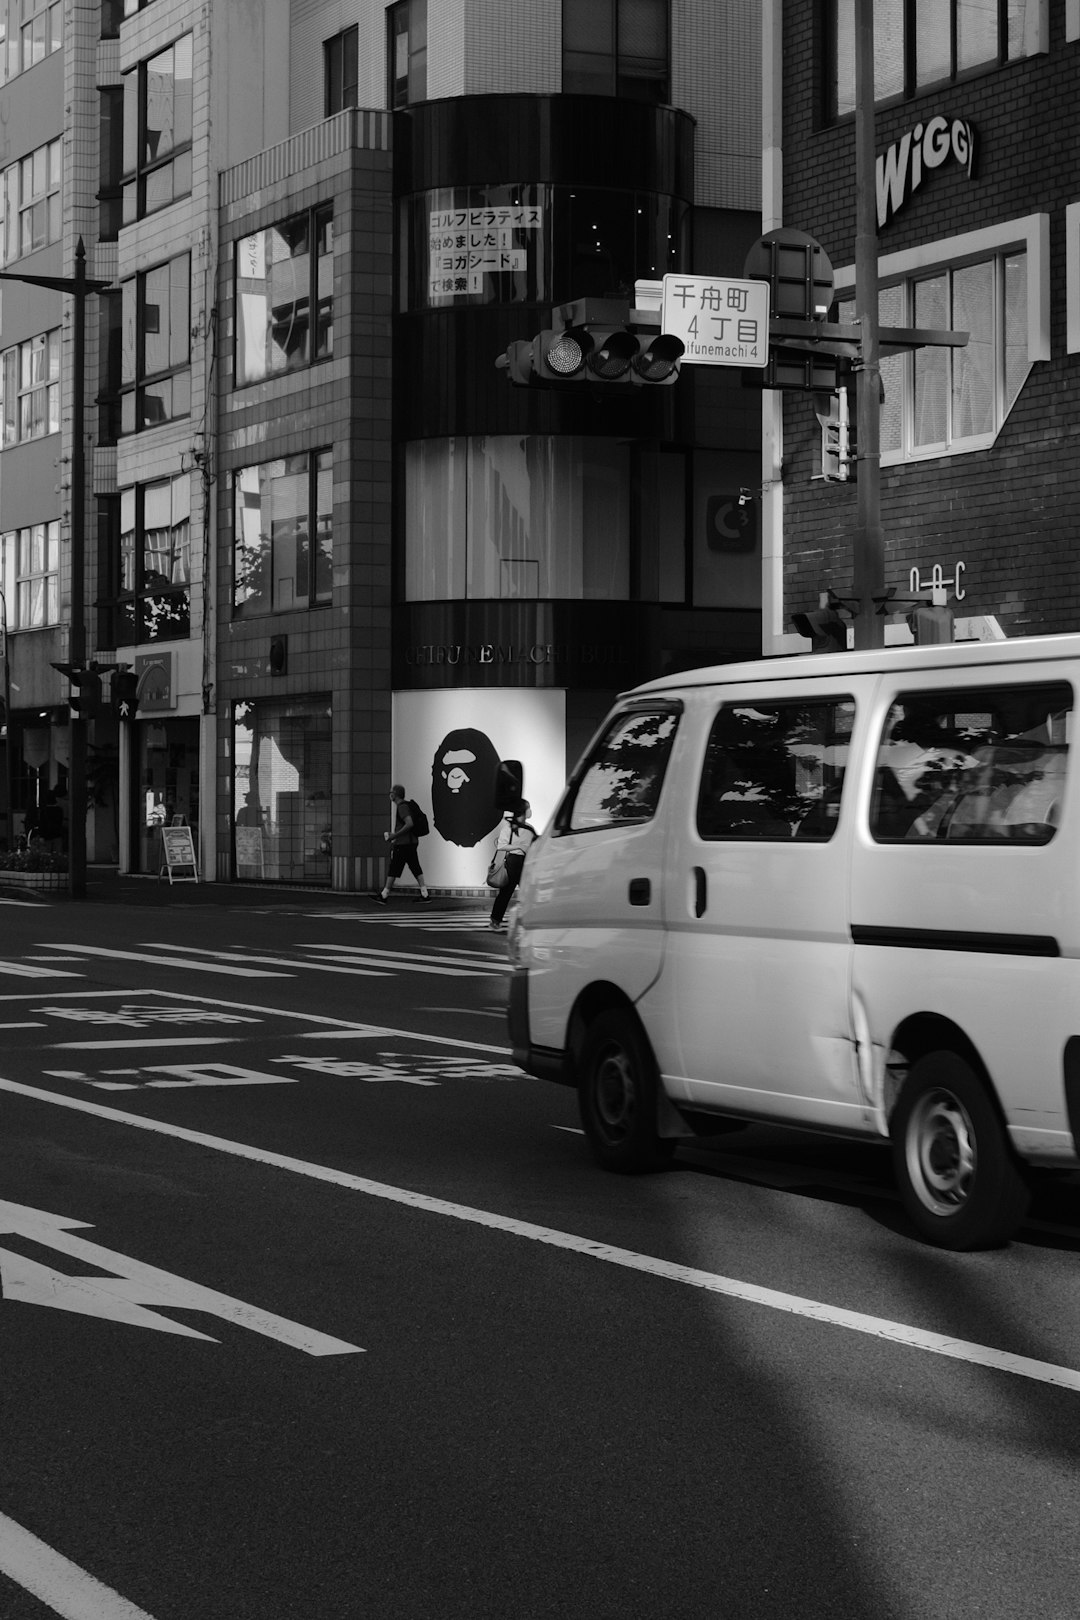 grayscale photo of white van on road